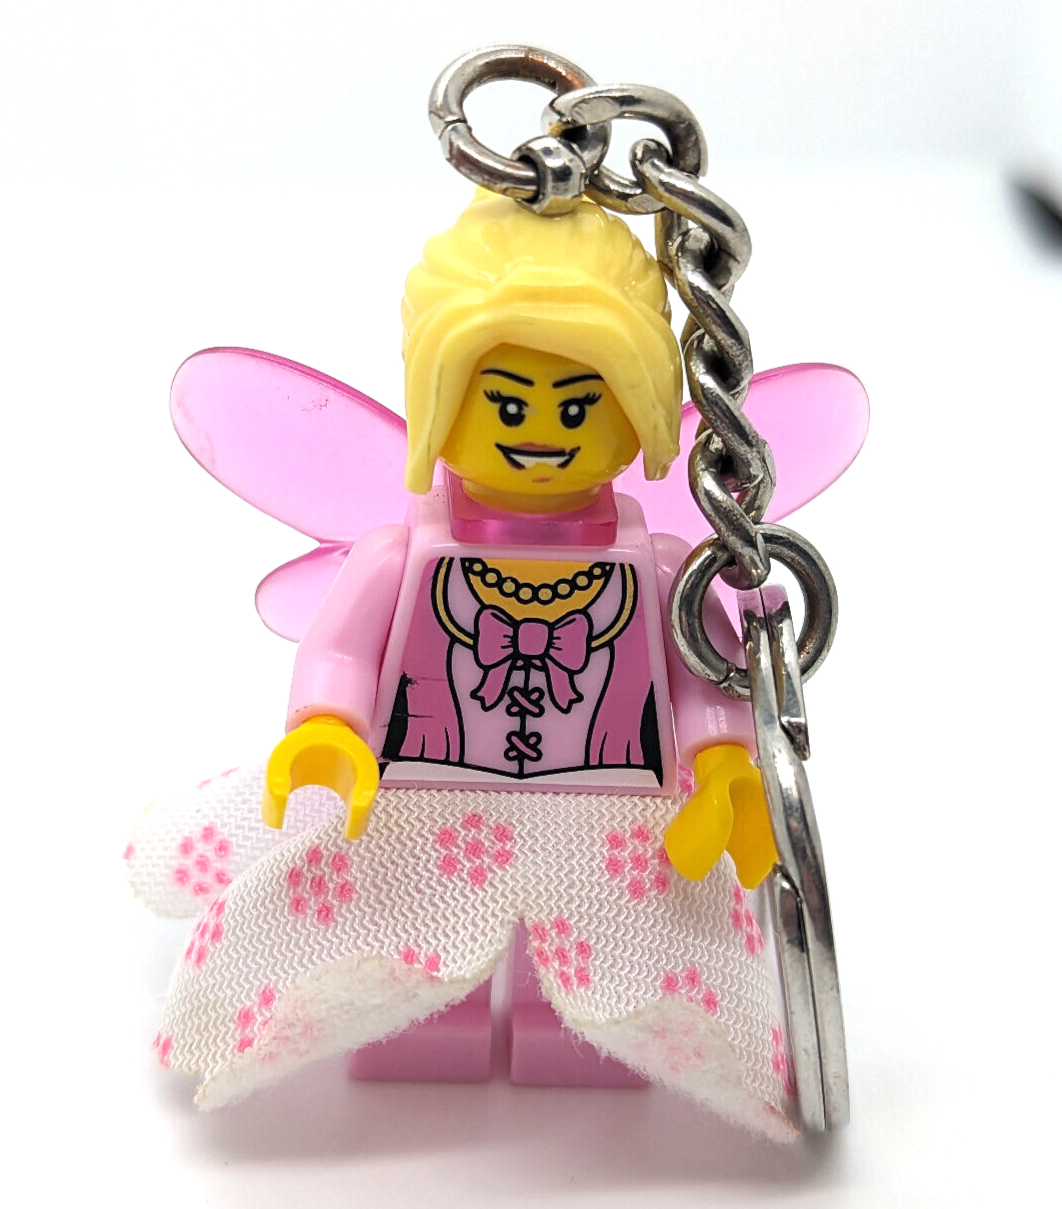 LEGO Fairy Girl with Cloth Skirt, Pink Wings Minifigure Keychain (850951)